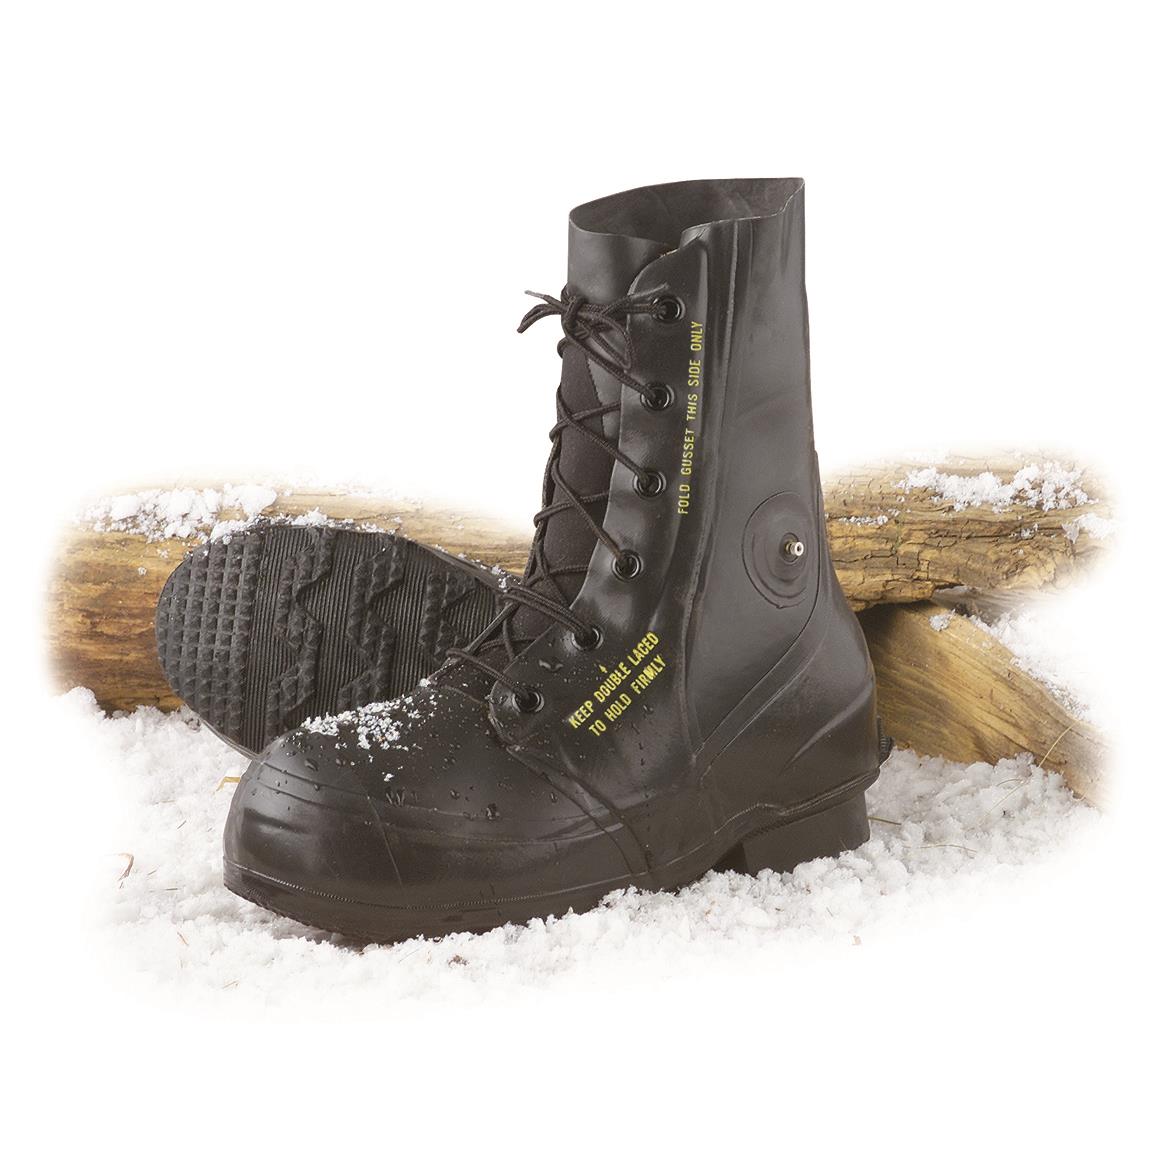 Army Surplus Winter Boots - Army Military